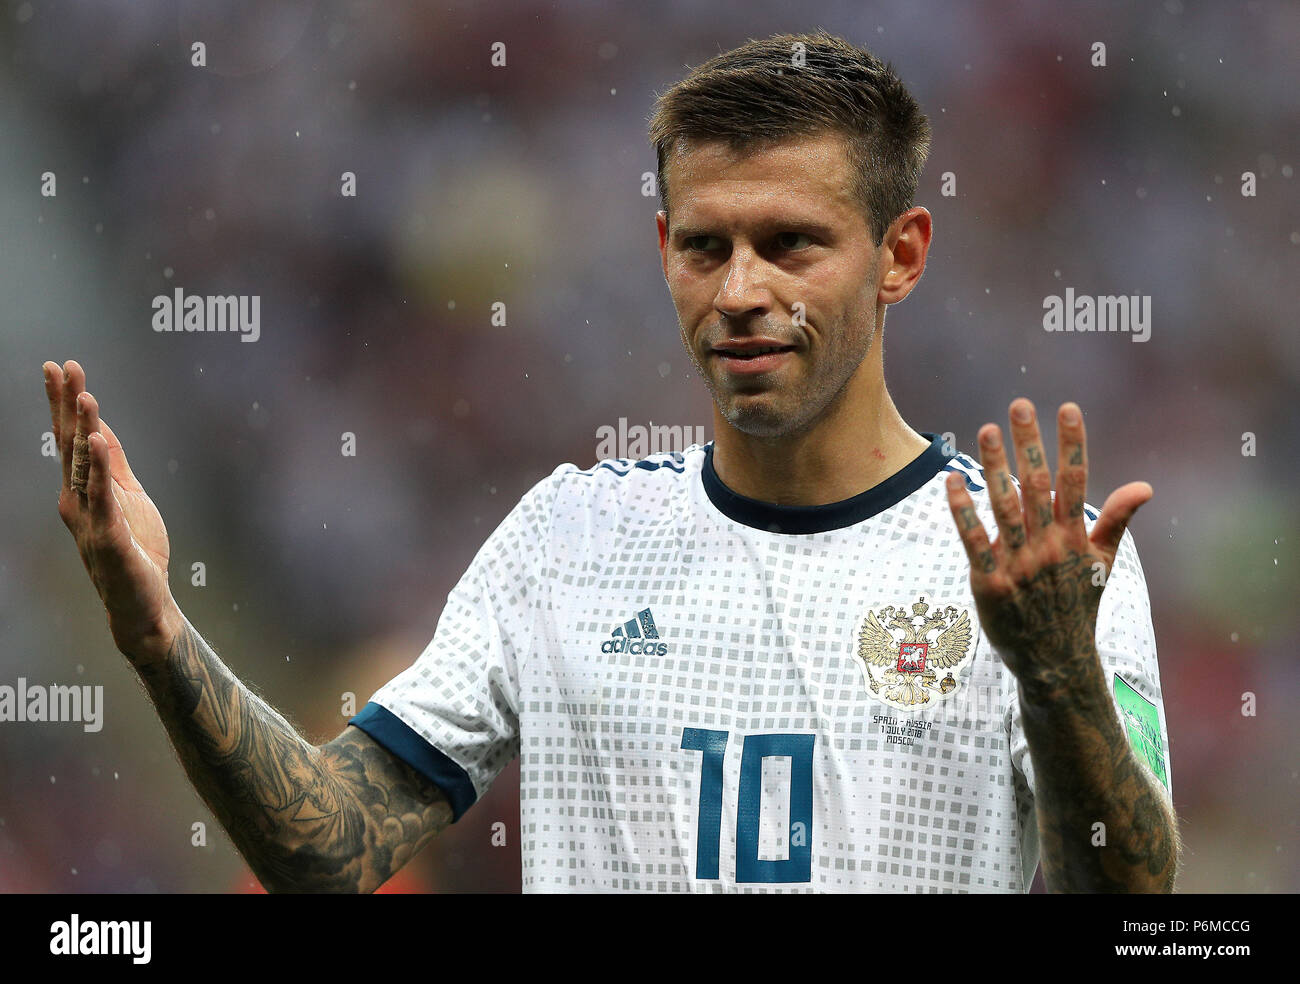 MOSCOU, MO - 01.07.2018: SPAIN VS RUSSIA - Fedor SMOLOV of Russia during the match between Spain and Russia, valid for the eighth-finals of the 2018 World Cup held at the Luzhniki Stadium in Moscow, Russia. (Photo: Rodolfo Buhrer/La Imagem/Fotoarena) Stock Photo